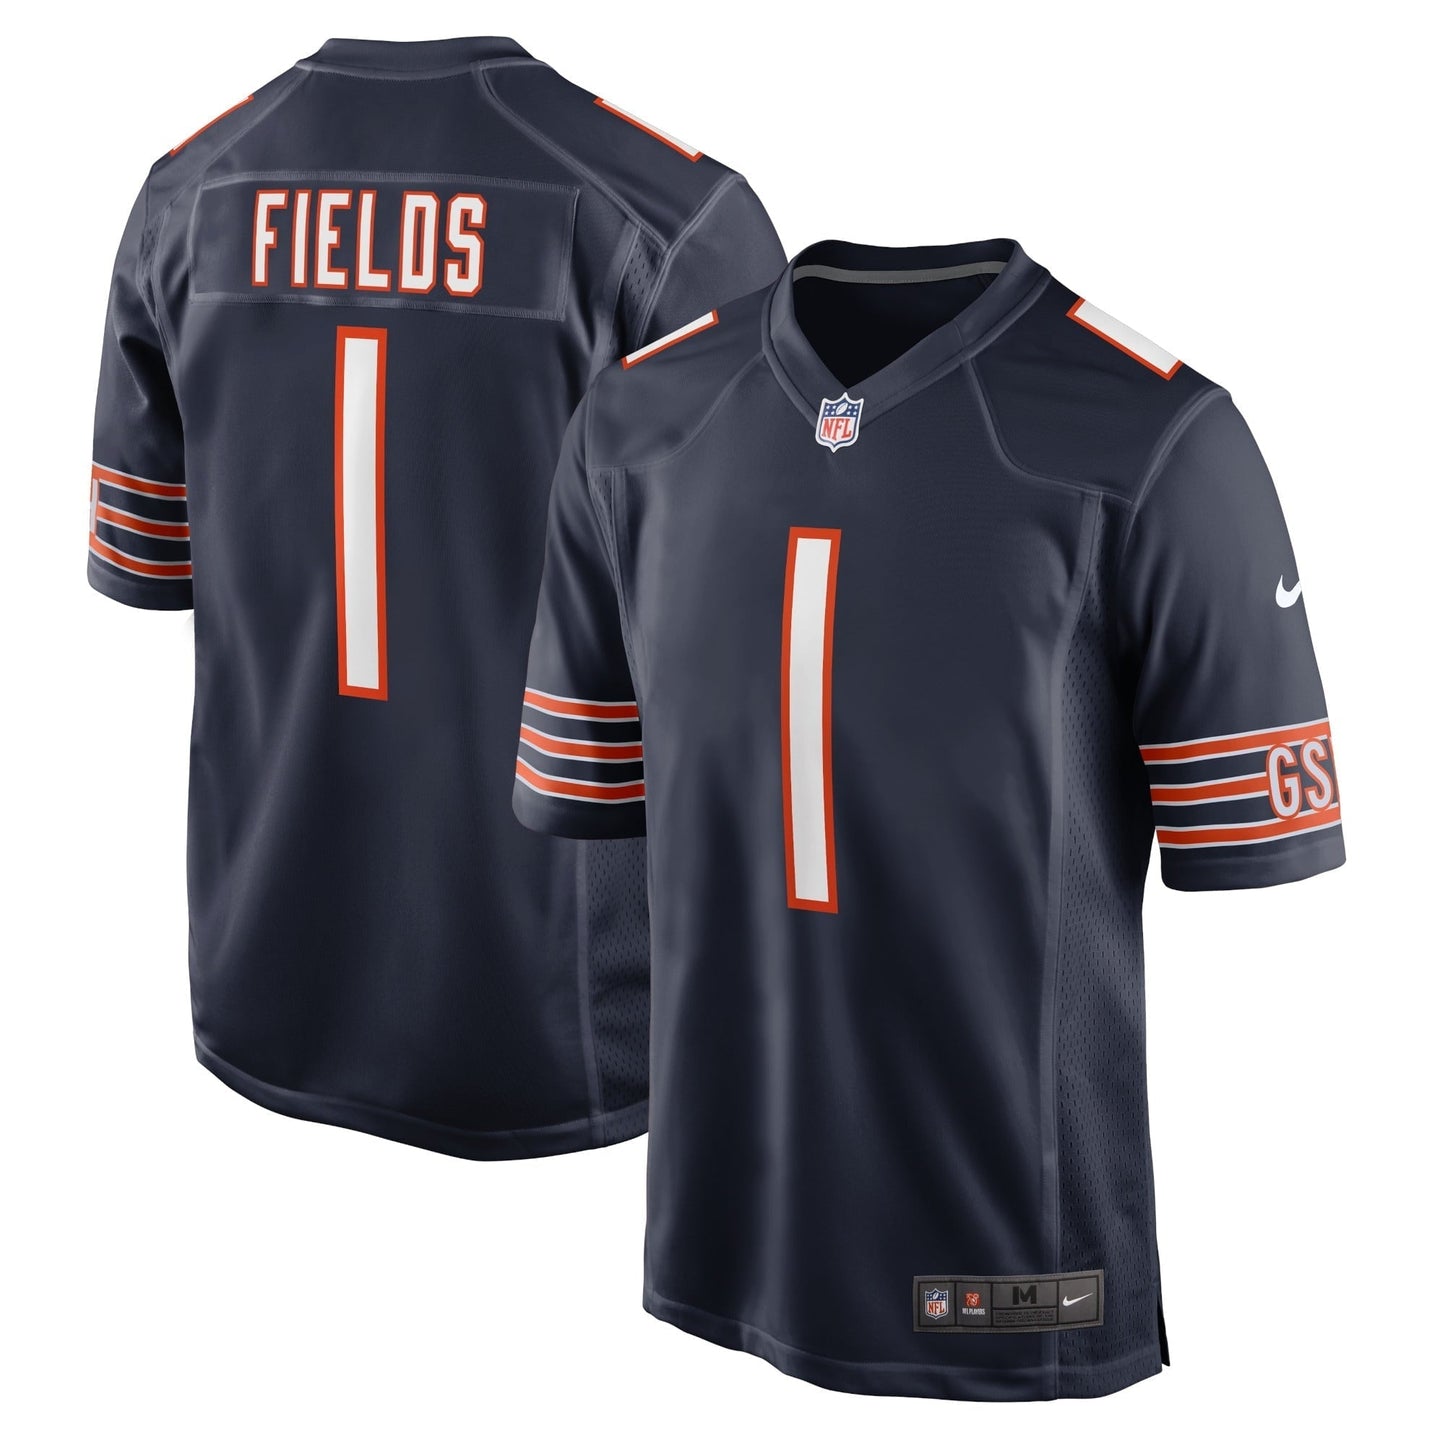 Men's Nike Justin Fields Navy Chicago Bears Player Game Jersey